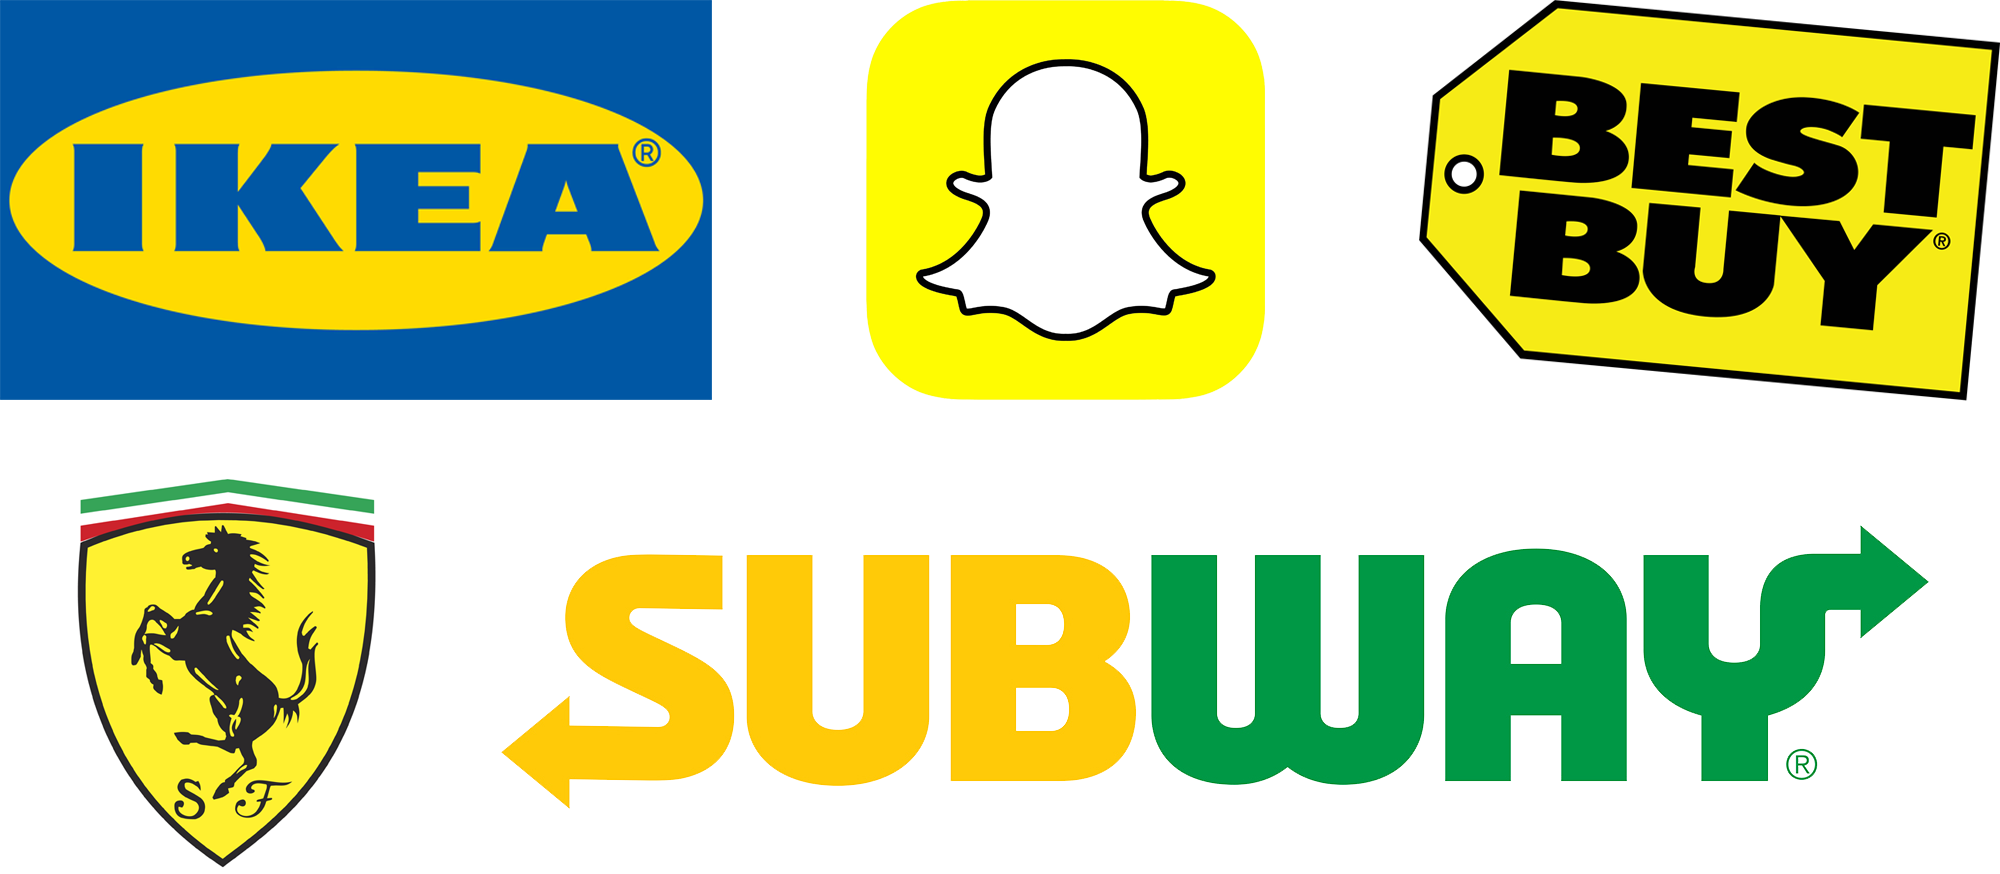 Famous brands that use yellow in their logos